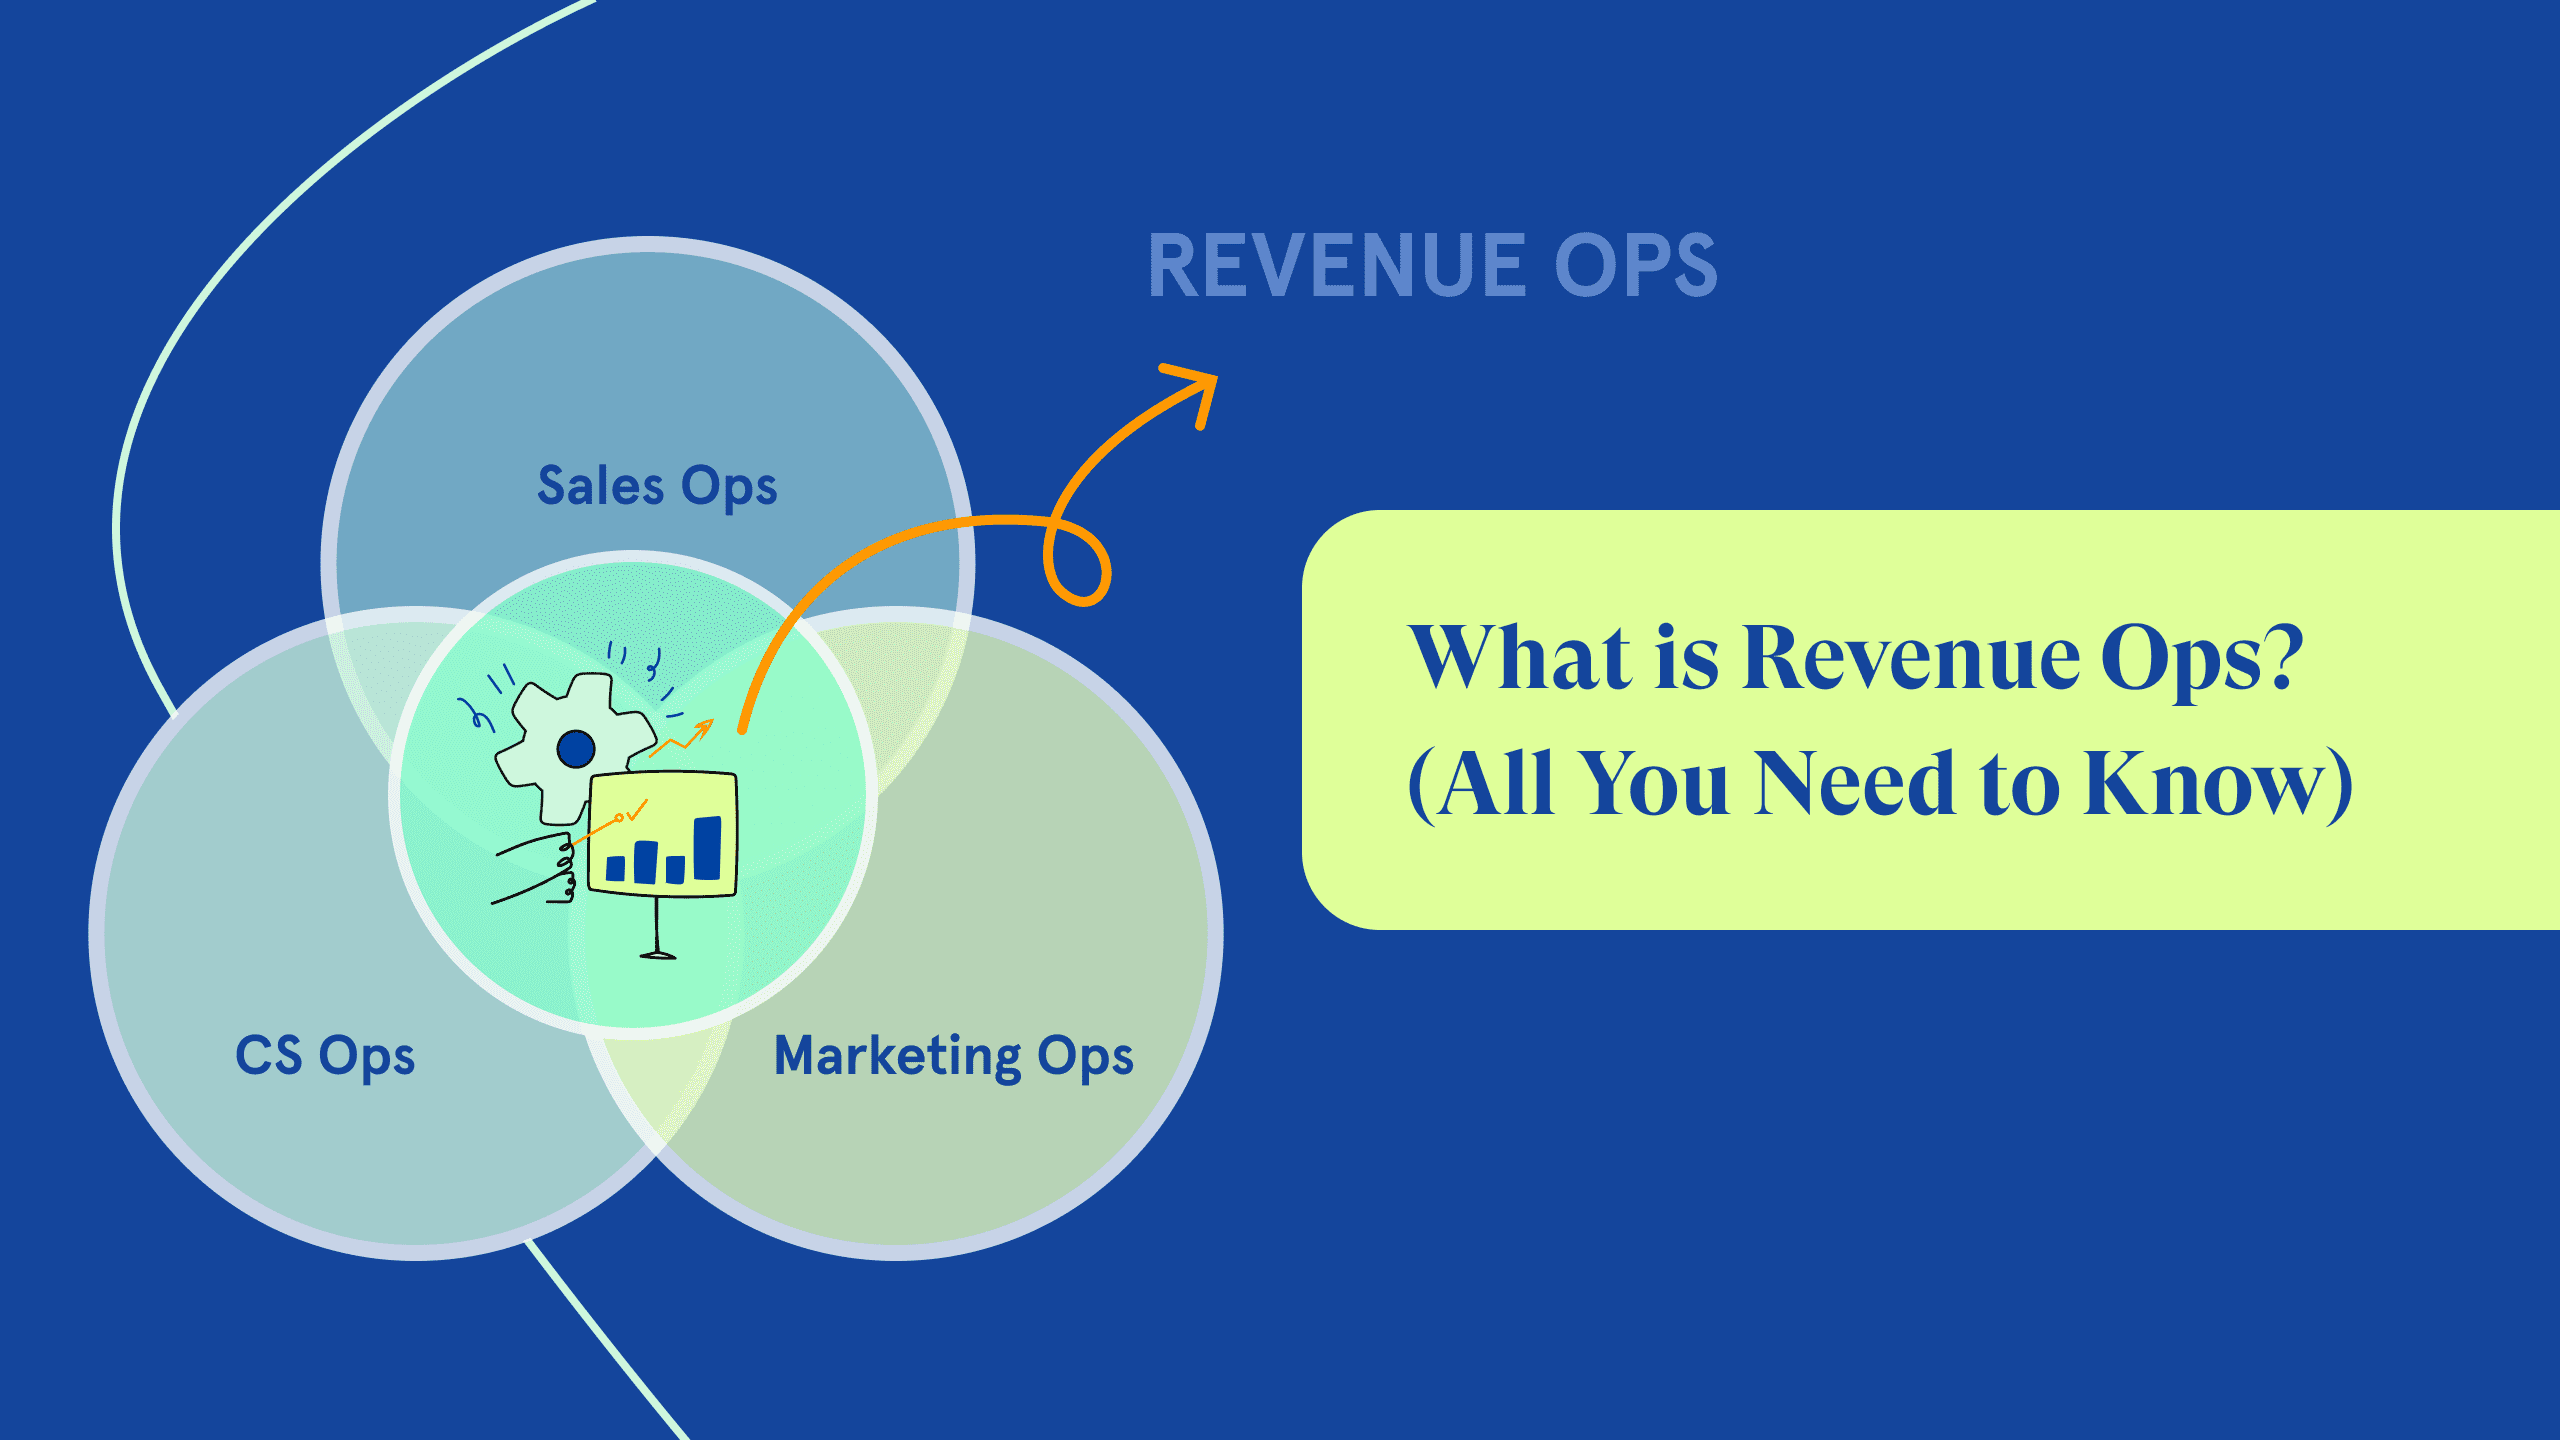 What is Revenue Ops? (All You Need to Know)